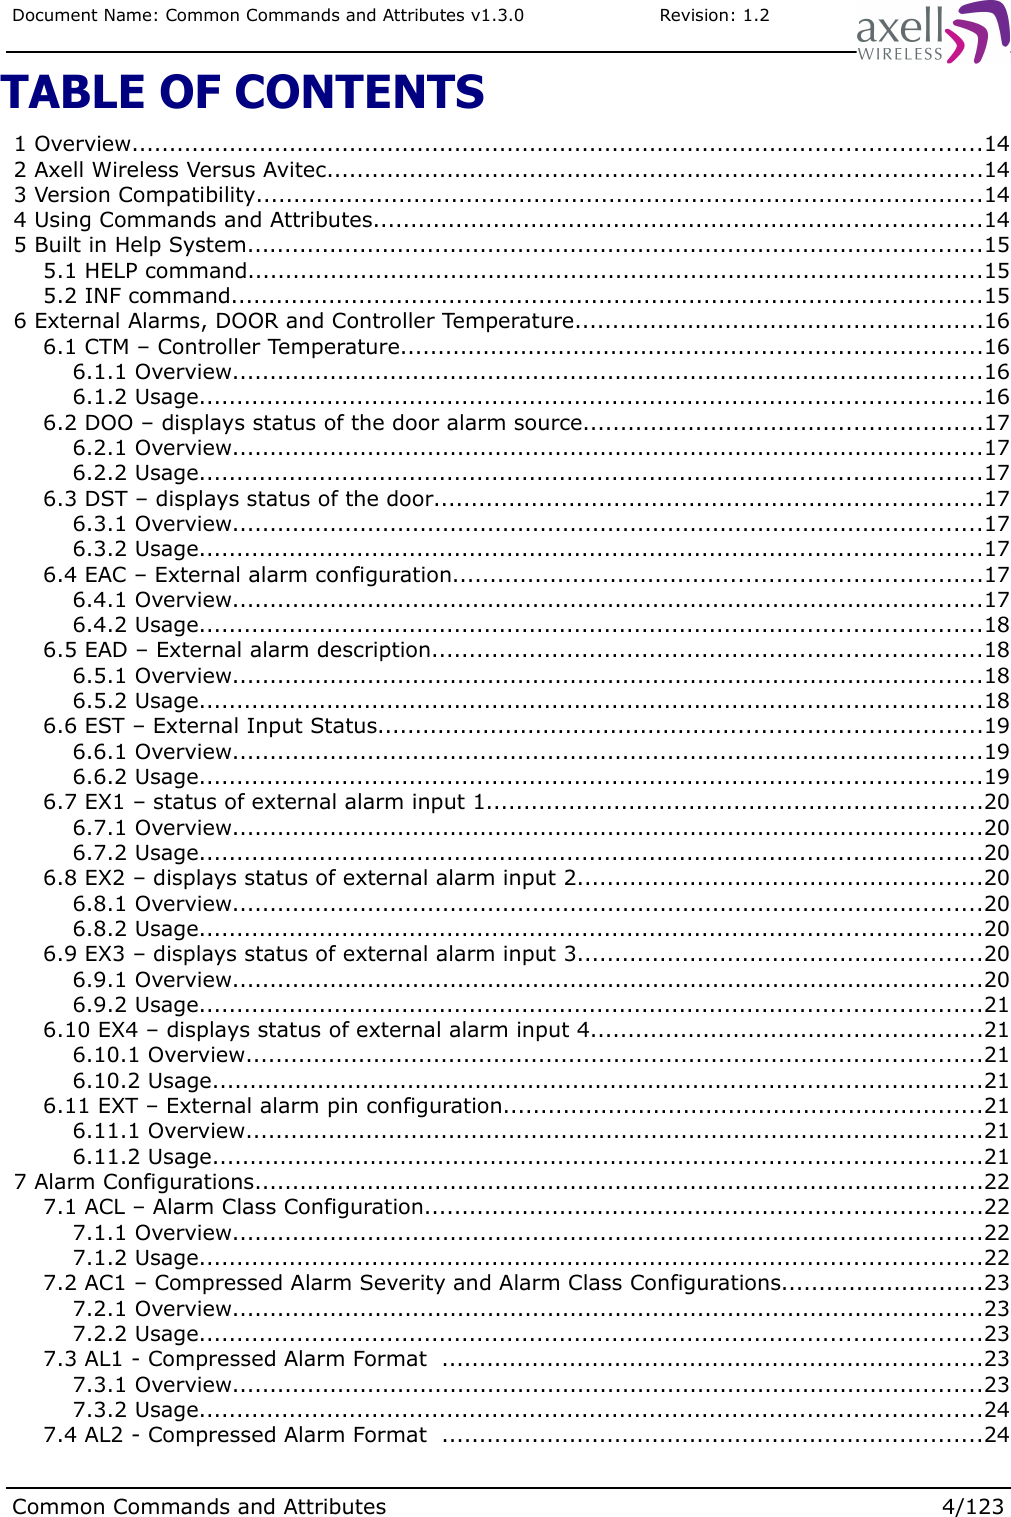 Document Name: Common Commands and Attributes v1.3.0                       Revision: 1.2TABLE OF CONTENTS 1 Overview.................................................................................................................14 2 Axell Wireless Versus Avitec.......................................................................................14 3 Version Compatibility.................................................................................................14 4 Using Commands and Attributes.................................................................................14 5 Built in Help System..................................................................................................15 5.1 HELP command..................................................................................................15 5.2 INF command....................................................................................................15 6 External Alarms, DOOR and Controller Temperature......................................................16 6.1 CTM – Controller Temperature.............................................................................16 6.1.1 Overview....................................................................................................16 6.1.2 Usage........................................................................................................16 6.2 DOO – displays status of the door alarm source.....................................................17 6.2.1 Overview....................................................................................................17 6.2.2 Usage........................................................................................................17 6.3 DST – displays status of the door.........................................................................17 6.3.1 Overview....................................................................................................17 6.3.2 Usage........................................................................................................17 6.4 EAC – External alarm configuration......................................................................17 6.4.1 Overview....................................................................................................17 6.4.2 Usage........................................................................................................18 6.5 EAD – External alarm description.........................................................................18 6.5.1 Overview....................................................................................................18 6.5.2 Usage........................................................................................................18 6.6 EST – External Input Status................................................................................19 6.6.1 Overview....................................................................................................19 6.6.2 Usage........................................................................................................19 6.7 EX1 – status of external alarm input 1..................................................................20 6.7.1 Overview....................................................................................................20 6.7.2 Usage........................................................................................................20 6.8 EX2 – displays status of external alarm input 2......................................................20 6.8.1 Overview....................................................................................................20 6.8.2 Usage........................................................................................................20 6.9 EX3 – displays status of external alarm input 3......................................................20 6.9.1 Overview....................................................................................................20 6.9.2 Usage........................................................................................................21 6.10 EX4 – displays status of external alarm input 4....................................................21 6.10.1 Overview..................................................................................................21 6.10.2 Usage......................................................................................................21 6.11 EXT – External alarm pin configuration................................................................21 6.11.1 Overview..................................................................................................21 6.11.2 Usage......................................................................................................21 7 Alarm Configurations.................................................................................................22 7.1 ACL – Alarm Class Configuration..........................................................................22 7.1.1 Overview....................................................................................................22 7.1.2 Usage........................................................................................................22 7.2 AC1 – Compressed Alarm Severity and Alarm Class Configurations...........................23 7.2.1 Overview....................................................................................................23 7.2.2 Usage........................................................................................................23 7.3 AL1 - Compressed Alarm Format  ........................................................................23 7.3.1 Overview....................................................................................................23 7.3.2 Usage........................................................................................................24 7.4 AL2 - Compressed Alarm Format  ........................................................................24Common Commands and Attributes 4/123